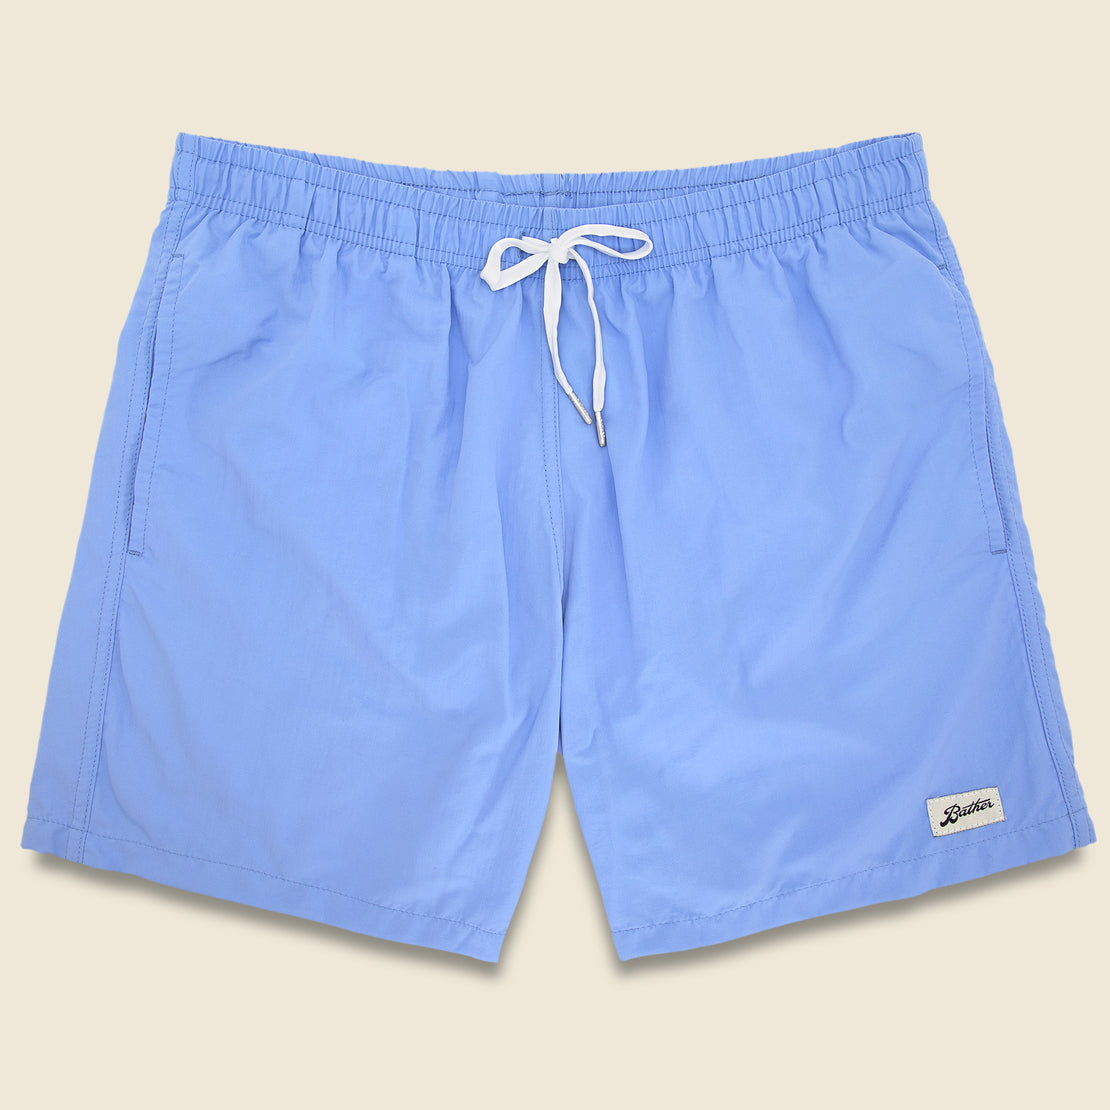 Bather Solid Swim Trunk - Periwinkle